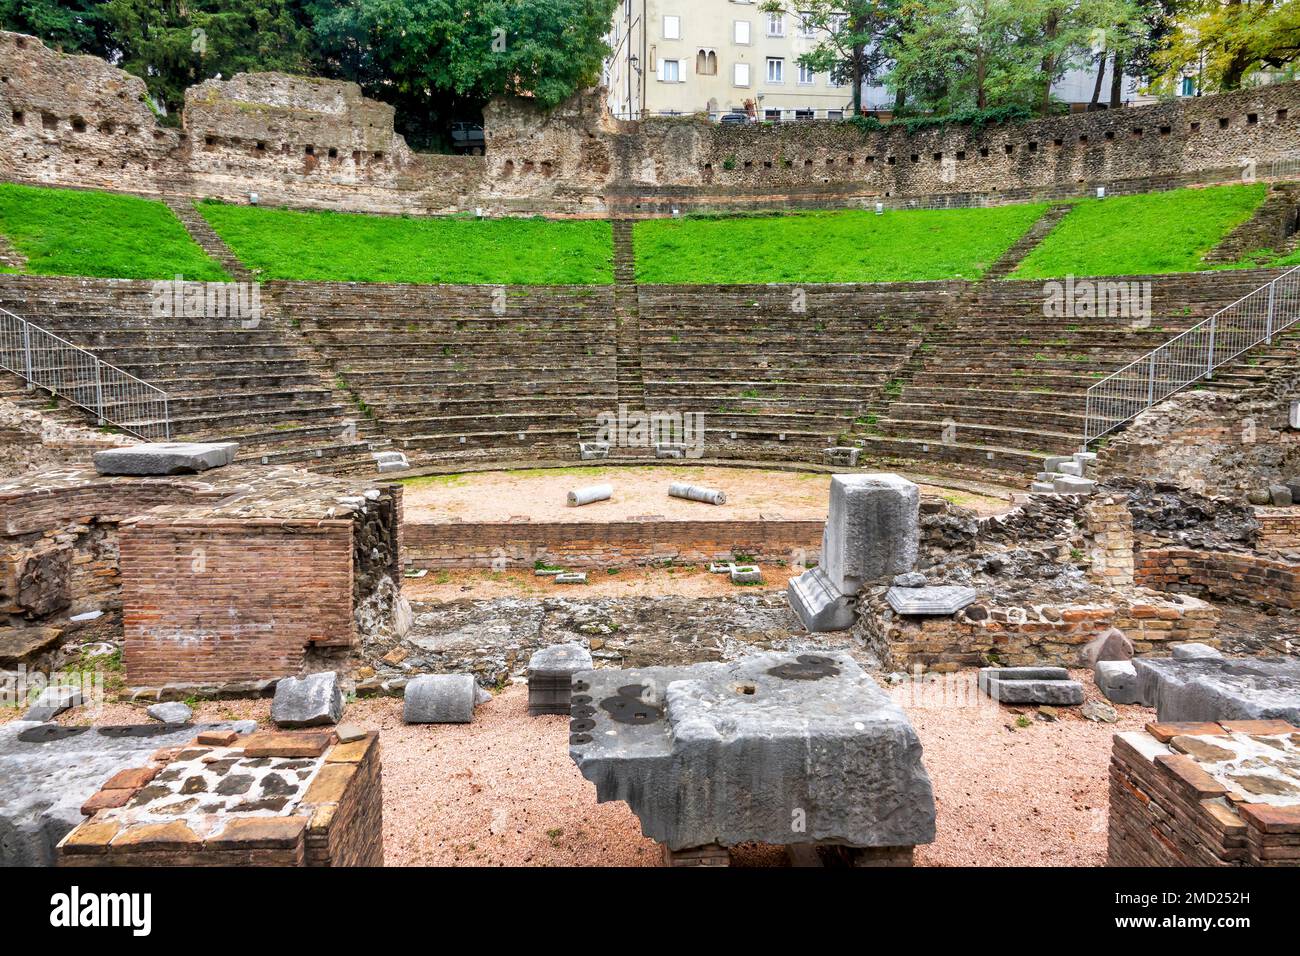 The Roman Theater of Trieste seen from the cavea, Trieste, Italy Stock Photo